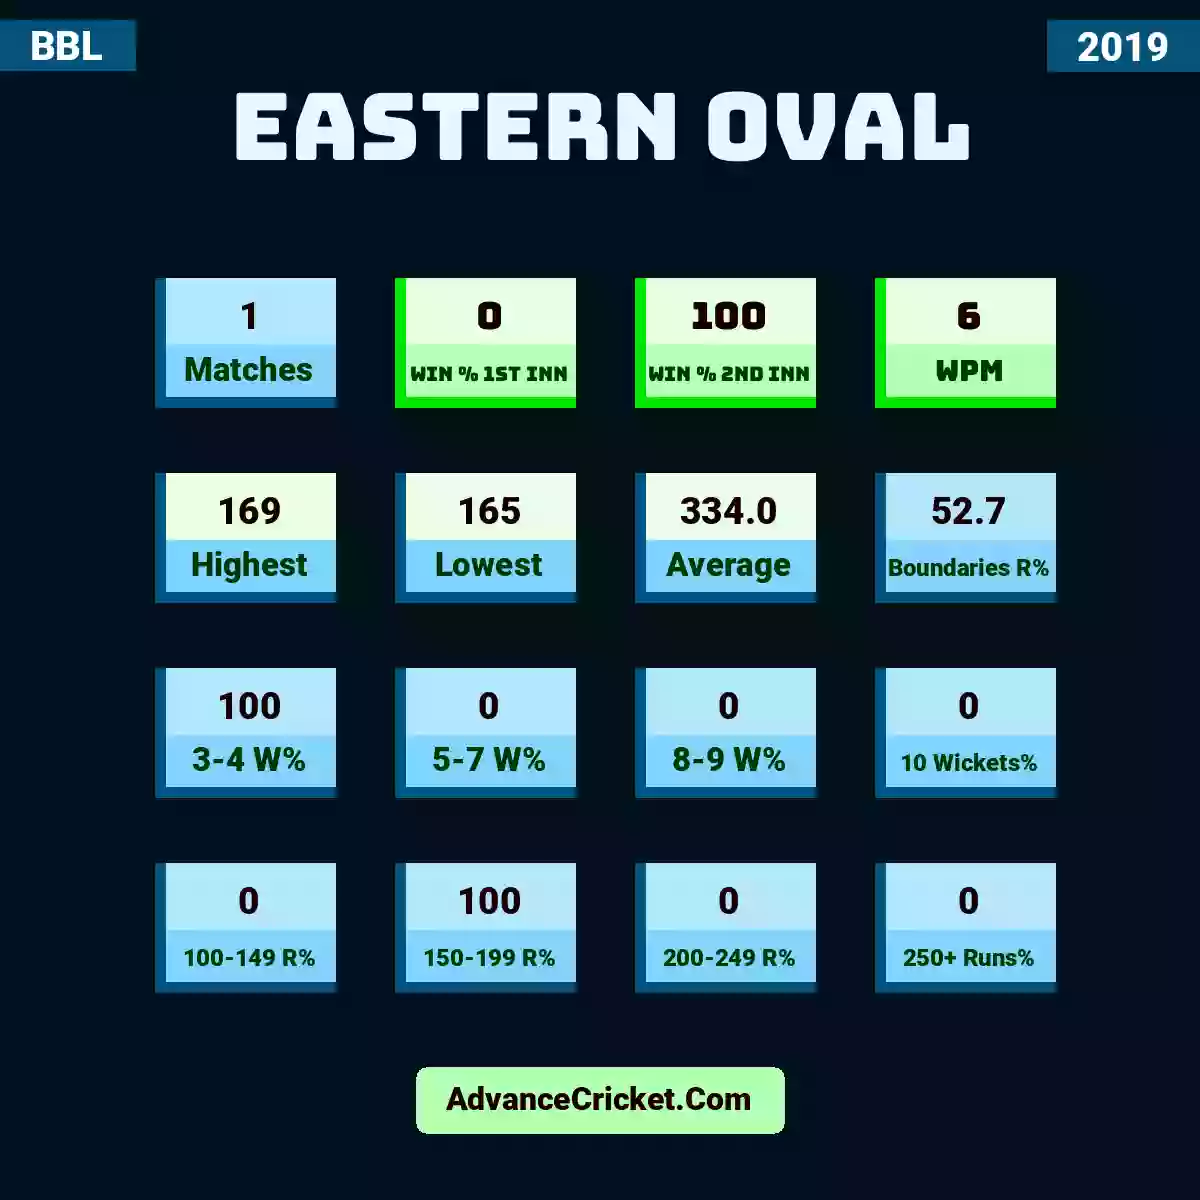 Image showing Eastern Oval with Matches: 1, Win % 1st Inn: 0, Win % 2nd Inn: 100, WPM: 6, Highest: 169, Lowest: 165, Average: 334.0, Boundaries R%: 52.7, 3-4 W%: 100, 5-7 W%: 0, 8-9 W%: 0, 10 Wickets%: 0, 100-149 R%: 0, 150-199 R%: 100, 200-249 R%: 0, 250+ Runs%: 0.